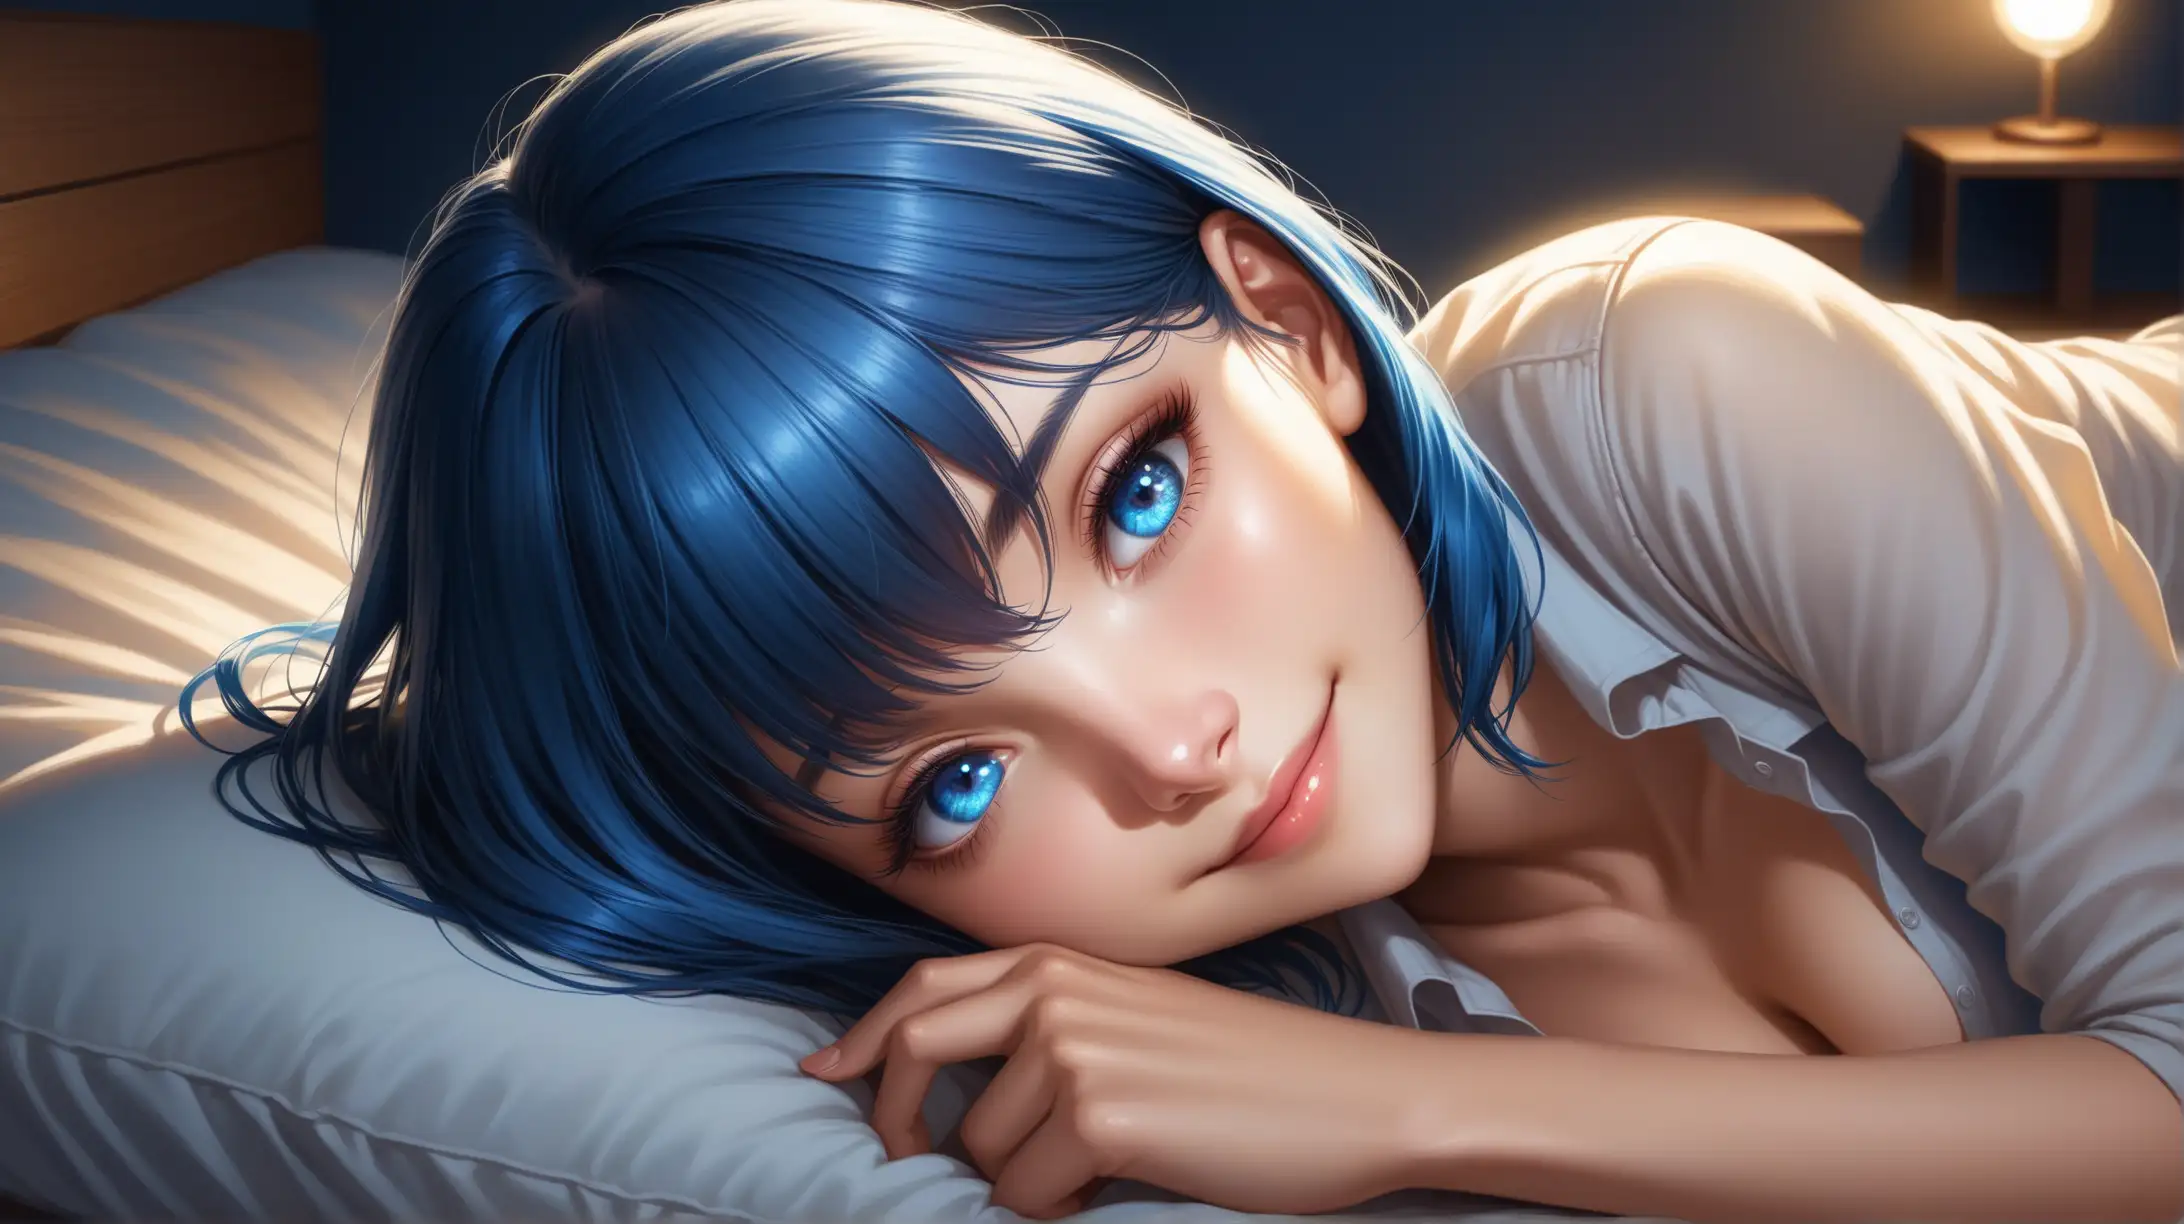 Seductive Woman with Blue Hair Smiling in Bedroom Ambiance